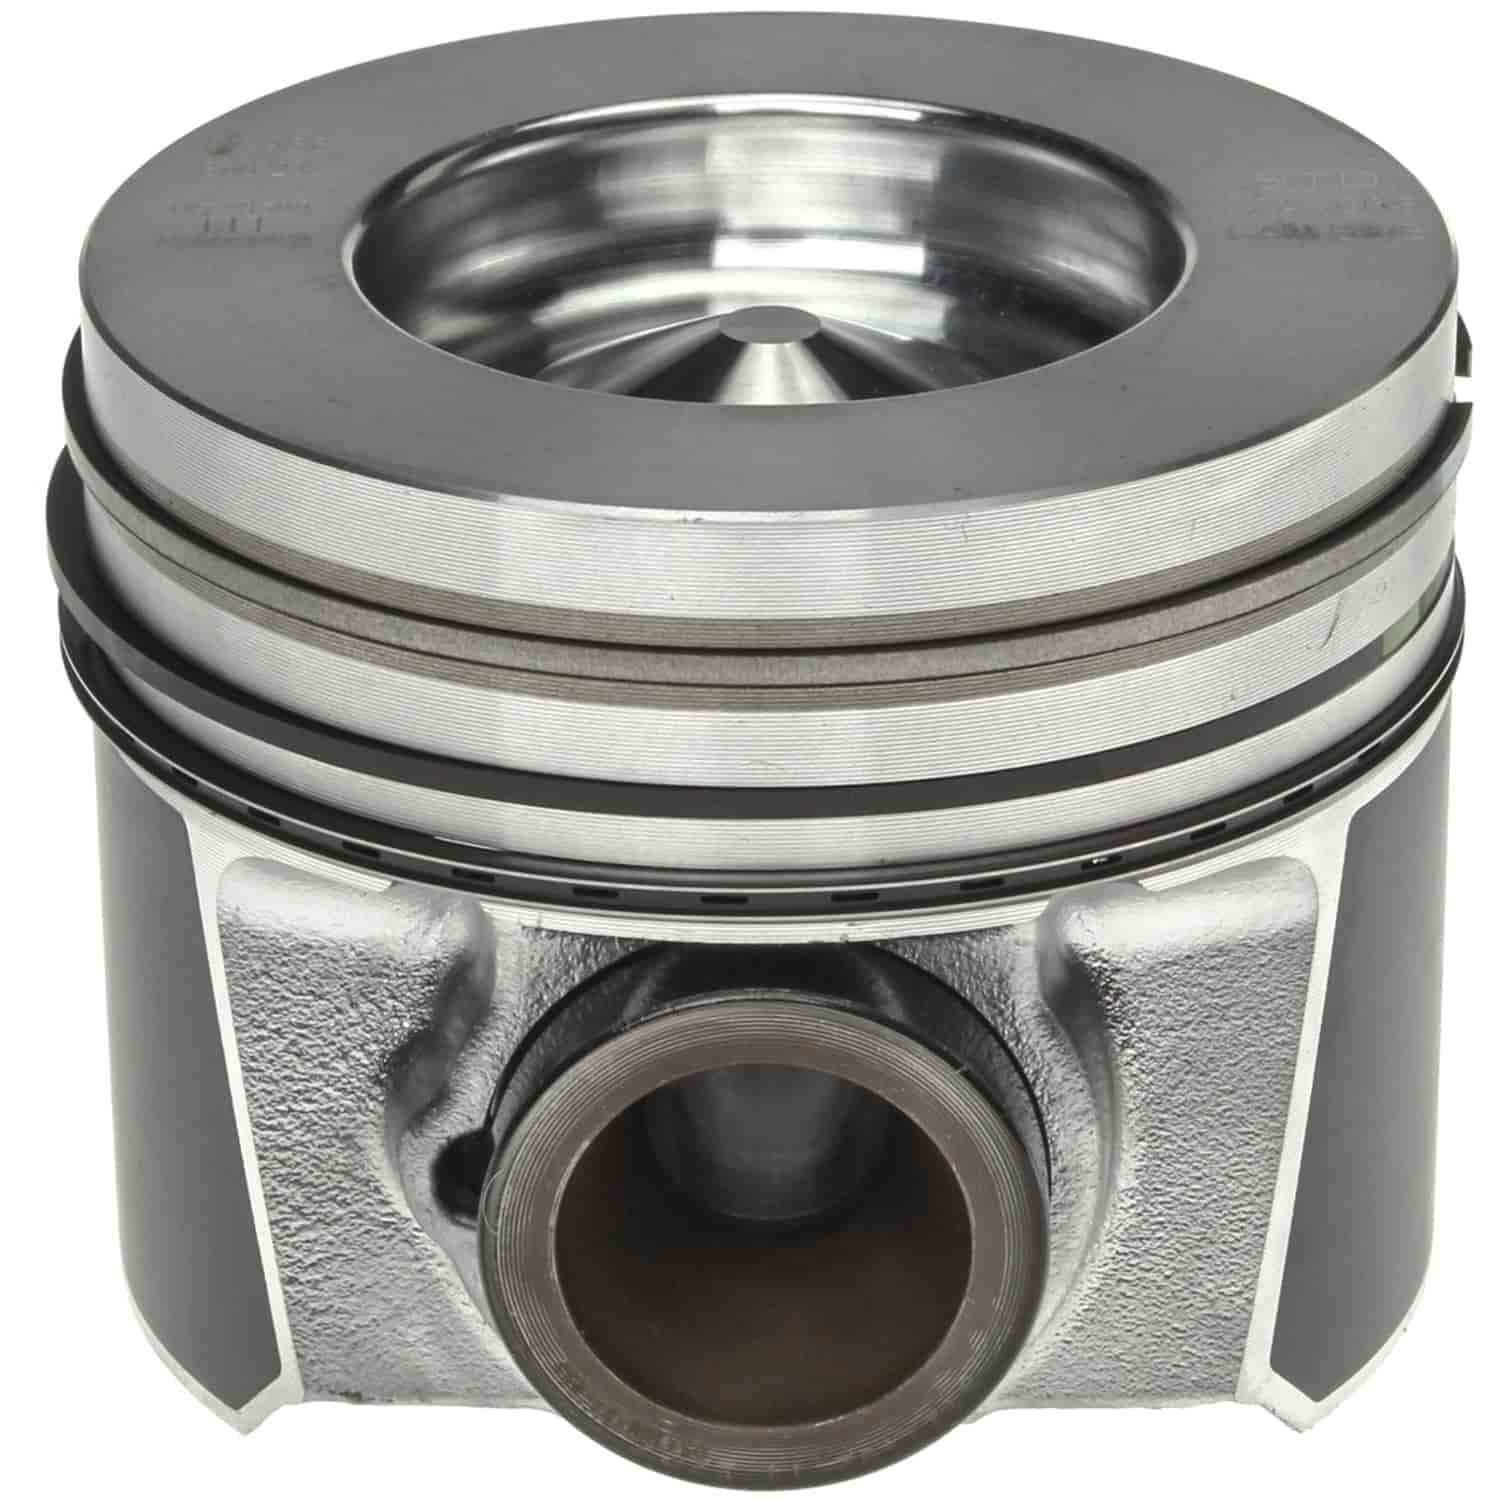 Piston and Rings Set 2008-2010 Ford/Navistar Powerstroke Diesel V8 6.4L with 3.886"/98.50mm Bore (+.50mm)